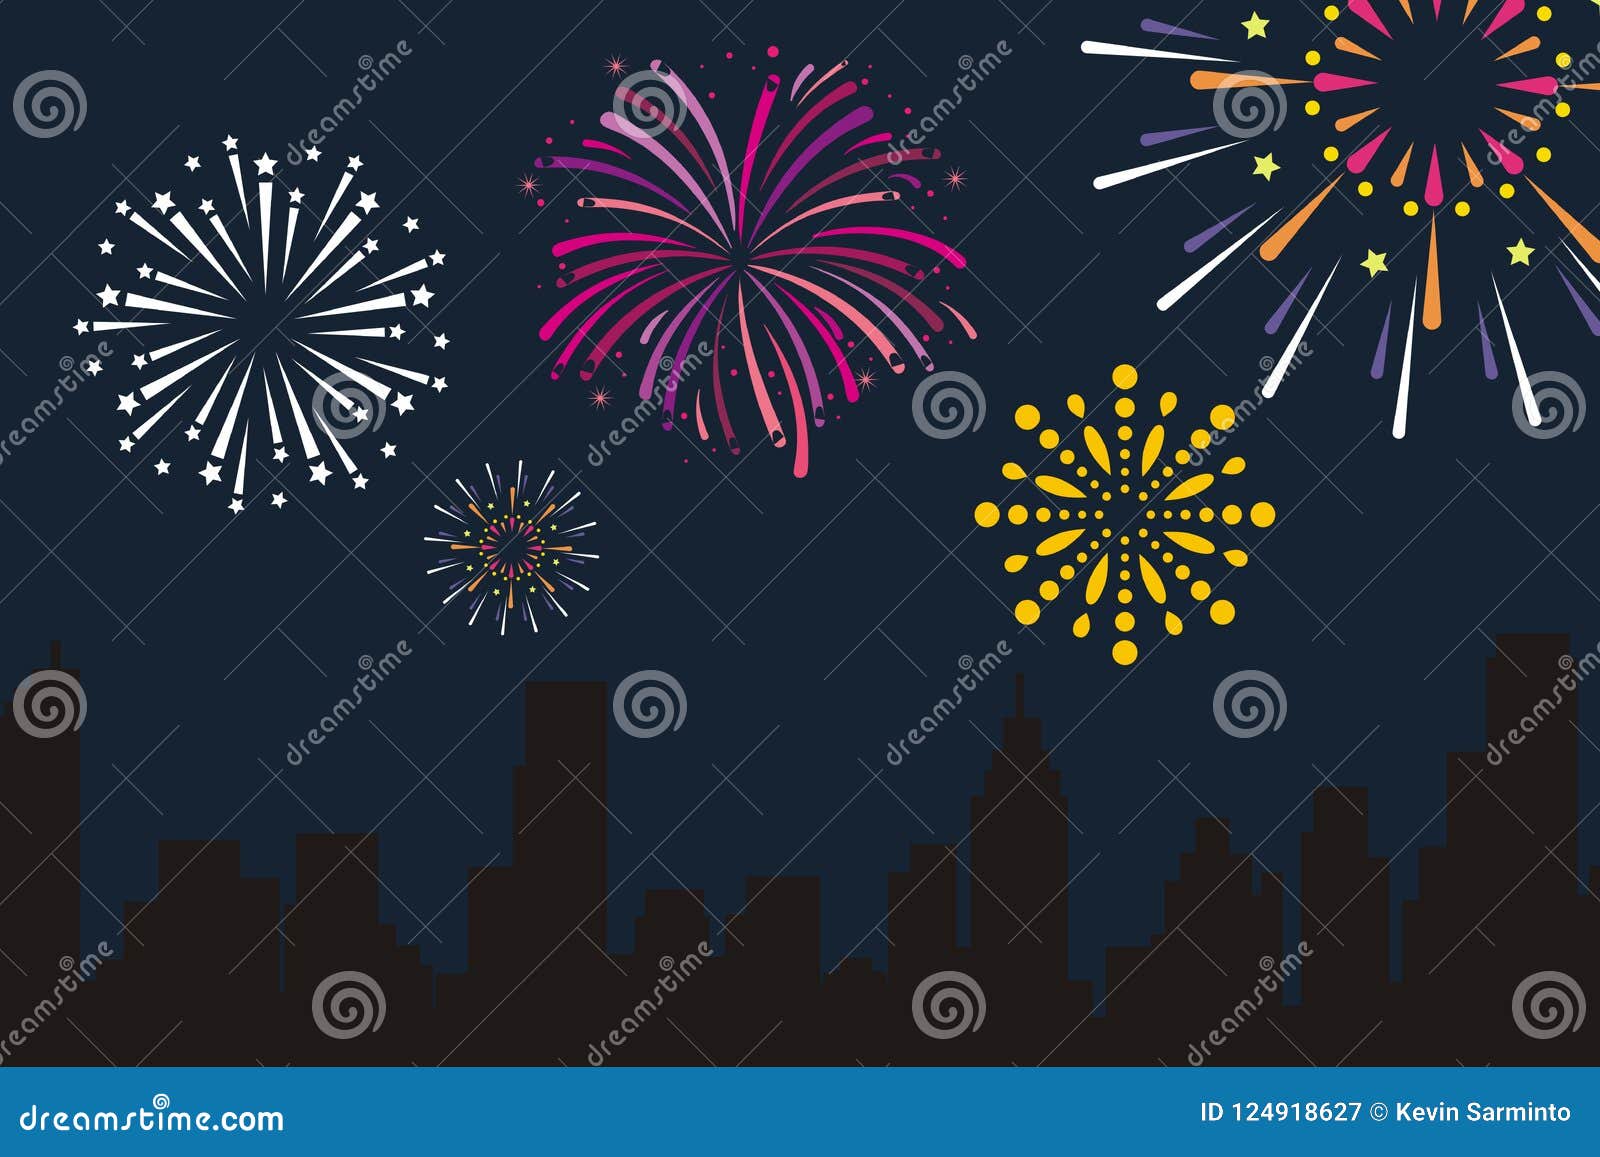 fire works background